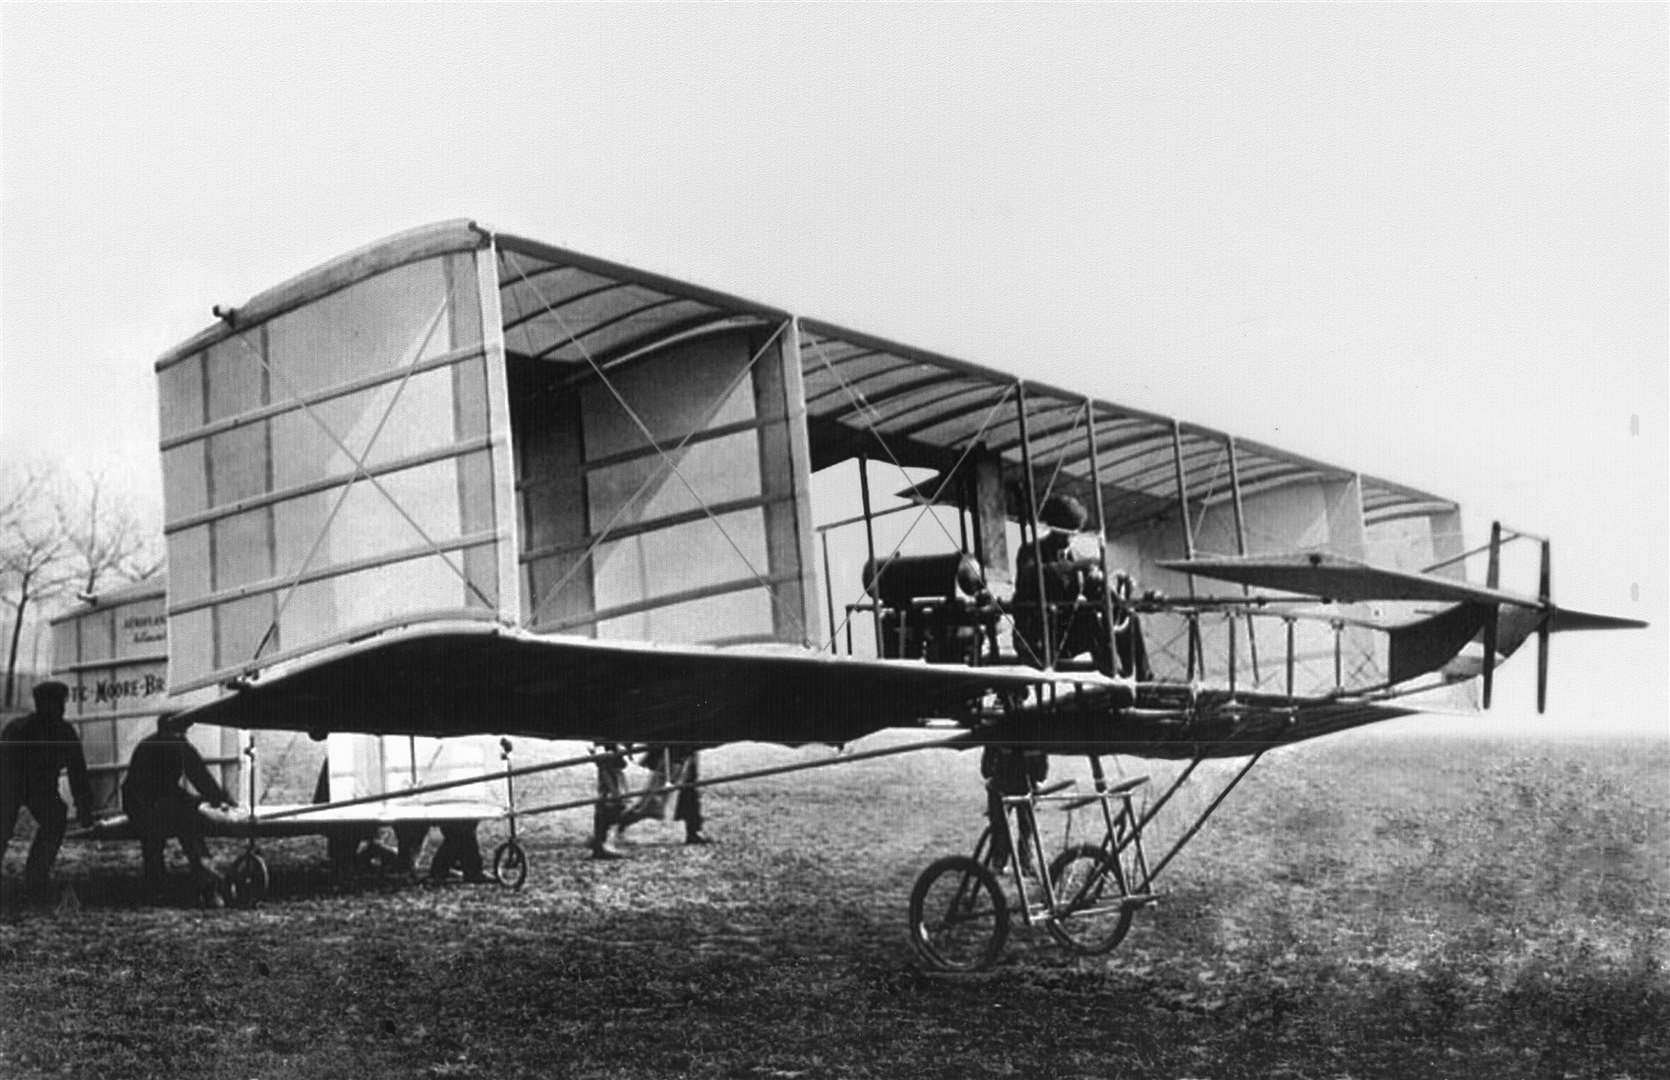 John Moore-Brabazon commencing the very first flight in Great Britain by a British aviator